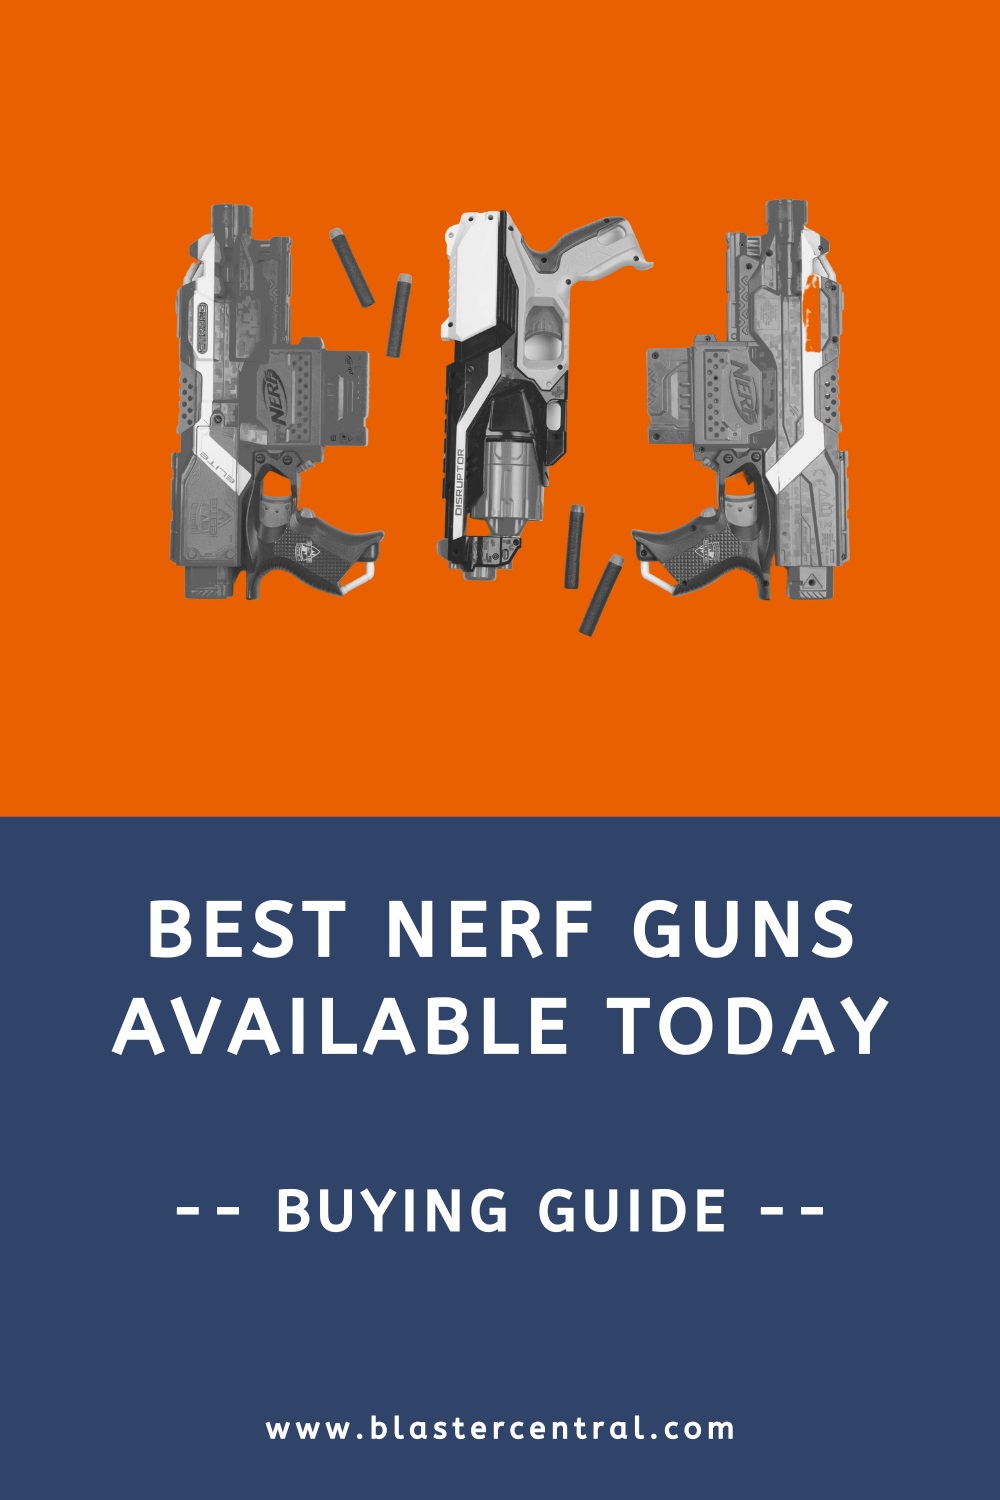 Best Nerf guns available today (buying guide)